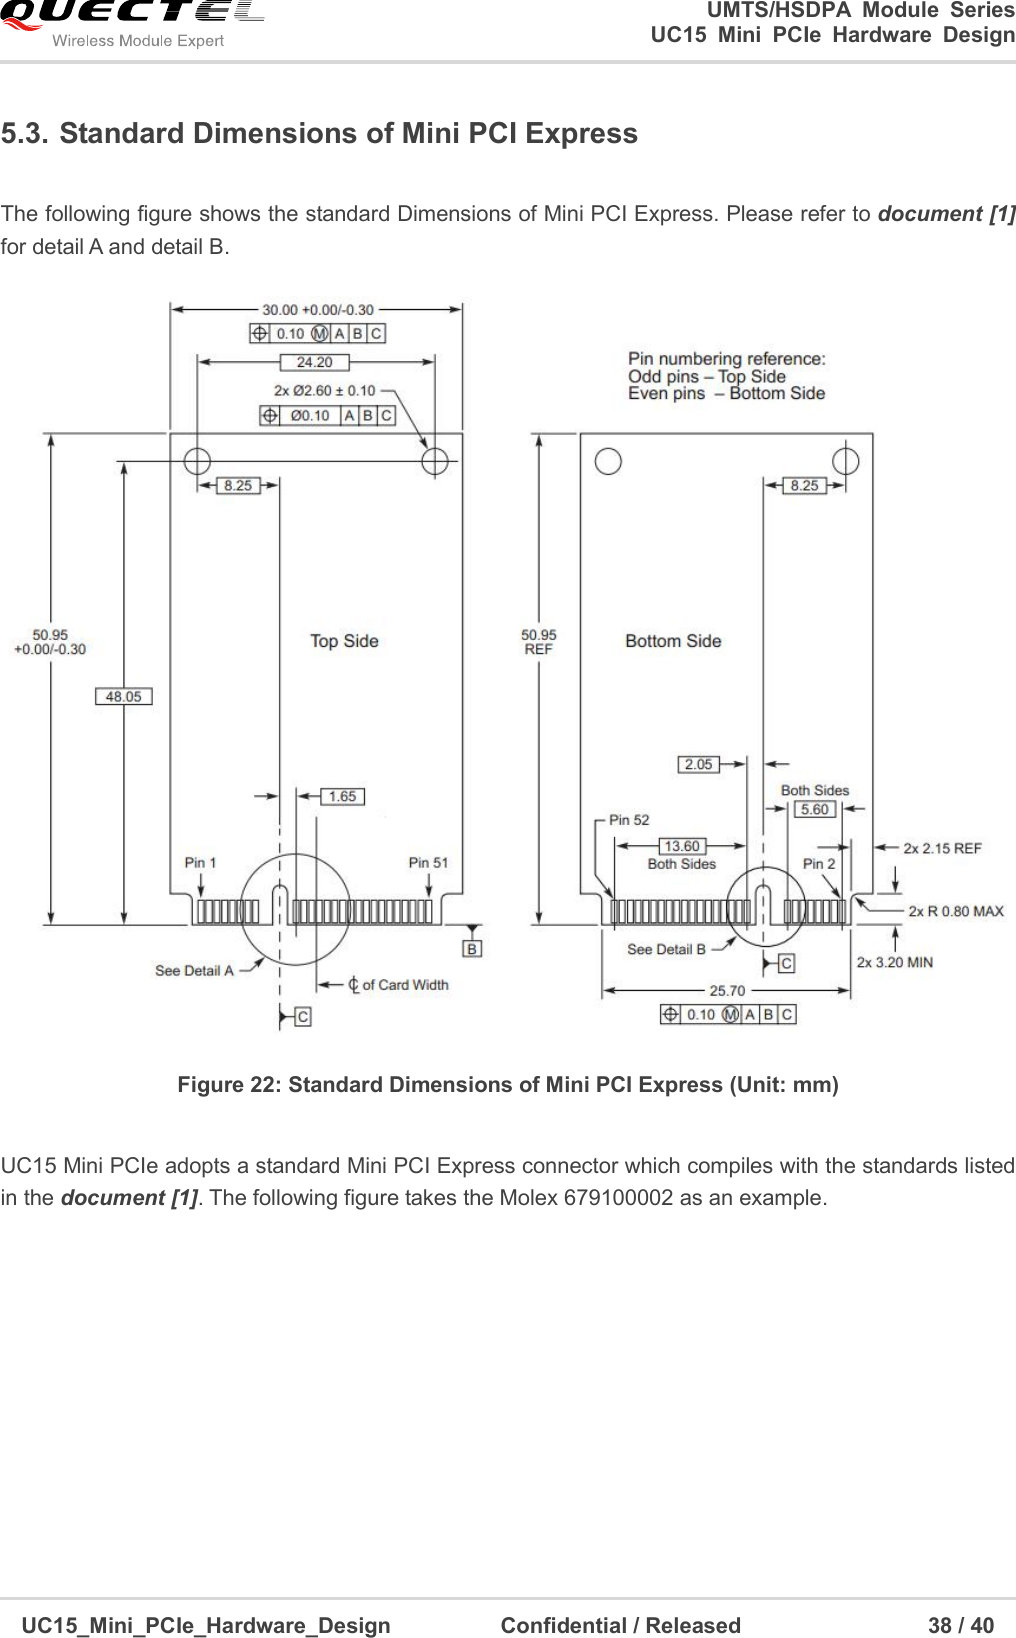                                                                        UMTS/HSDPA  Module  Series                                                          UC15 Mini PCIe Hardware Design  UC15_Mini_PCIe_Hardware_Design                    Confidential / Released                                  38 / 40    5.3. Standard Dimensions of Mini PCI Express  The following figure shows the standard Dimensions of Mini PCI Express. Please refer to document [1] for detail A and detail B.  Figure 22: Standard Dimensions of Mini PCI Express (Unit: mm)  UC15 Mini PCIe adopts a standard Mini PCI Express connector which compiles with the standards listed in the document [1]. The following figure takes the Molex 679100002 as an example. 